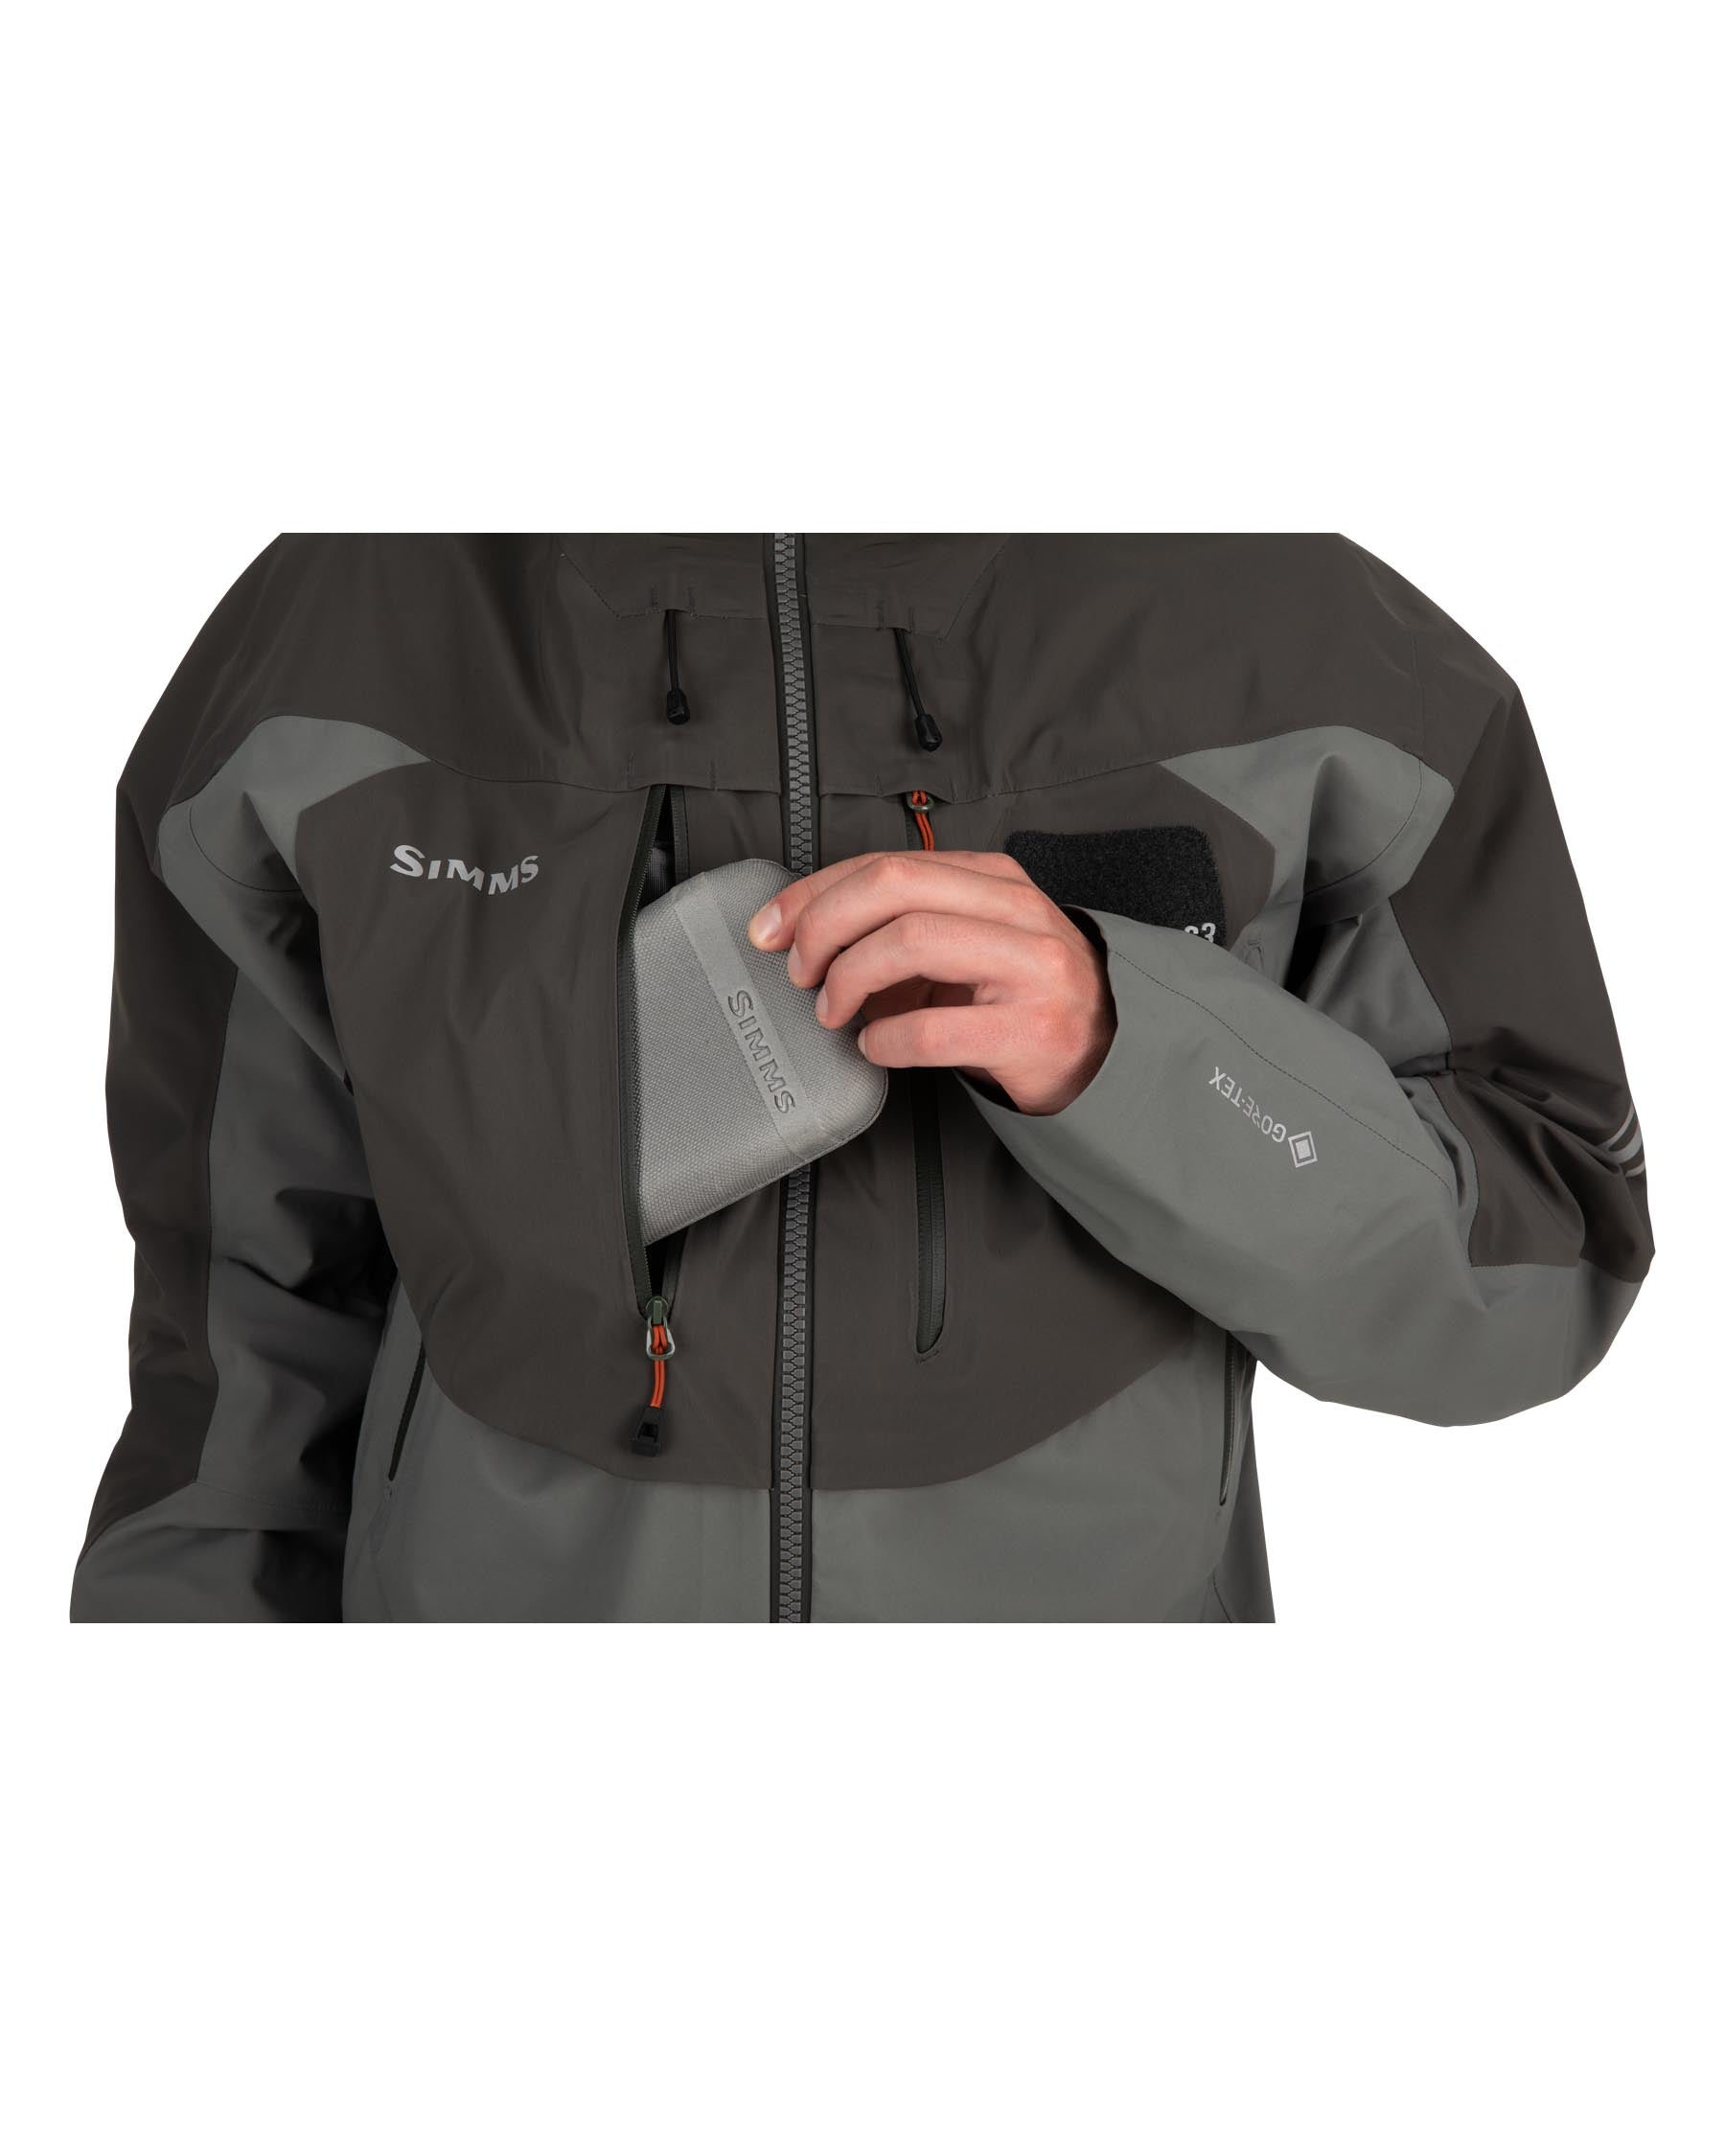 M's G3 Guide Wading Jacket | Simms Fishing Products